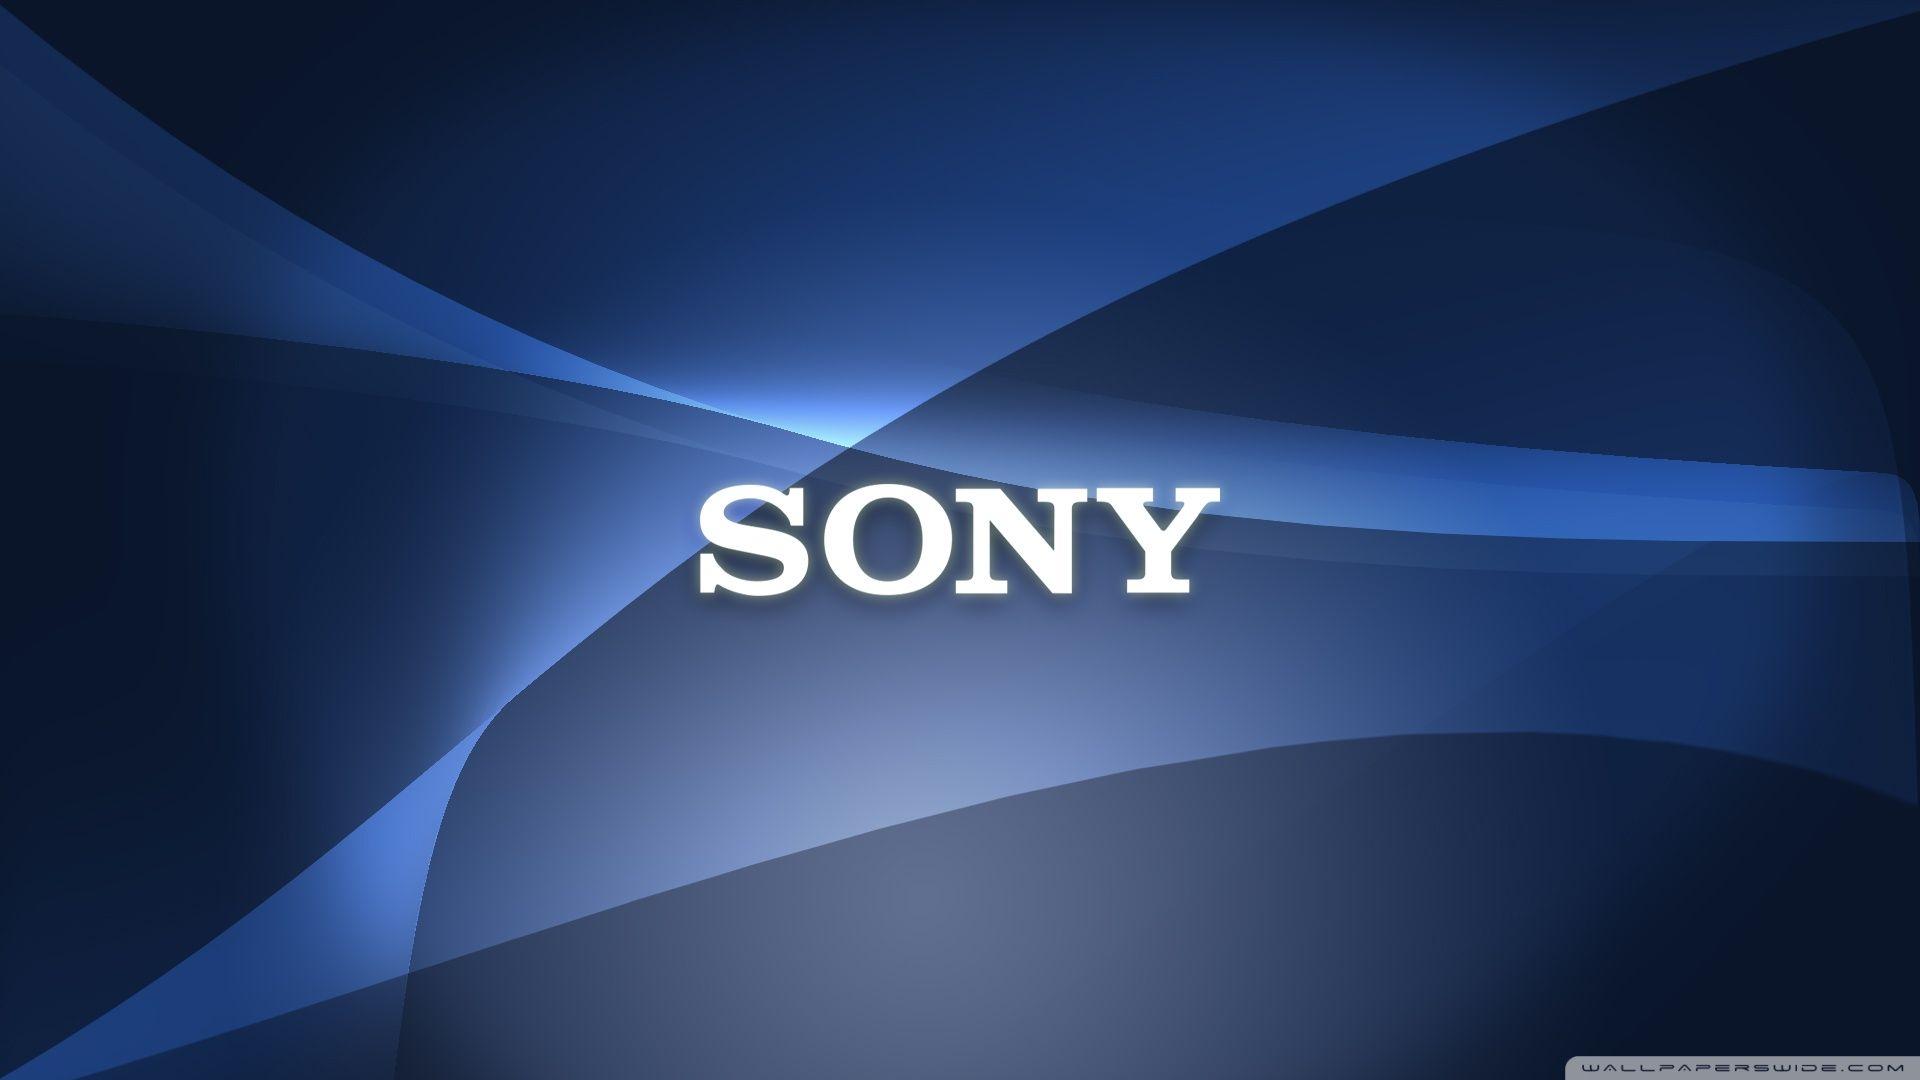 Sony Hd Wallpapers 1080p